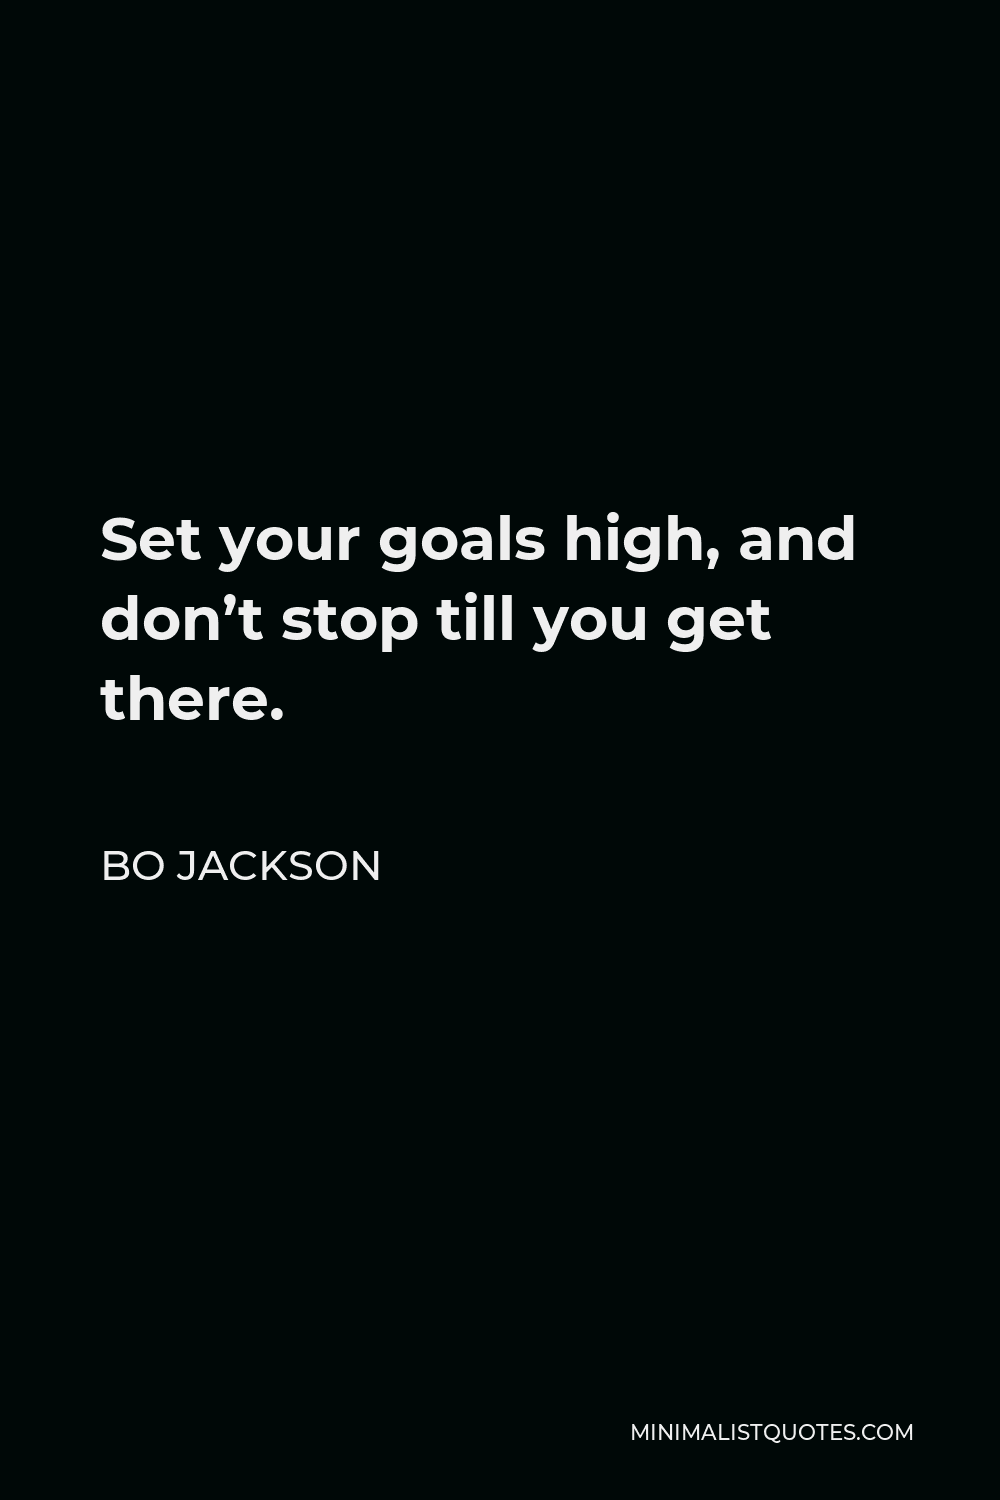 Bo Jackson Quote - Set your goals high, and don’t stop till you get there.